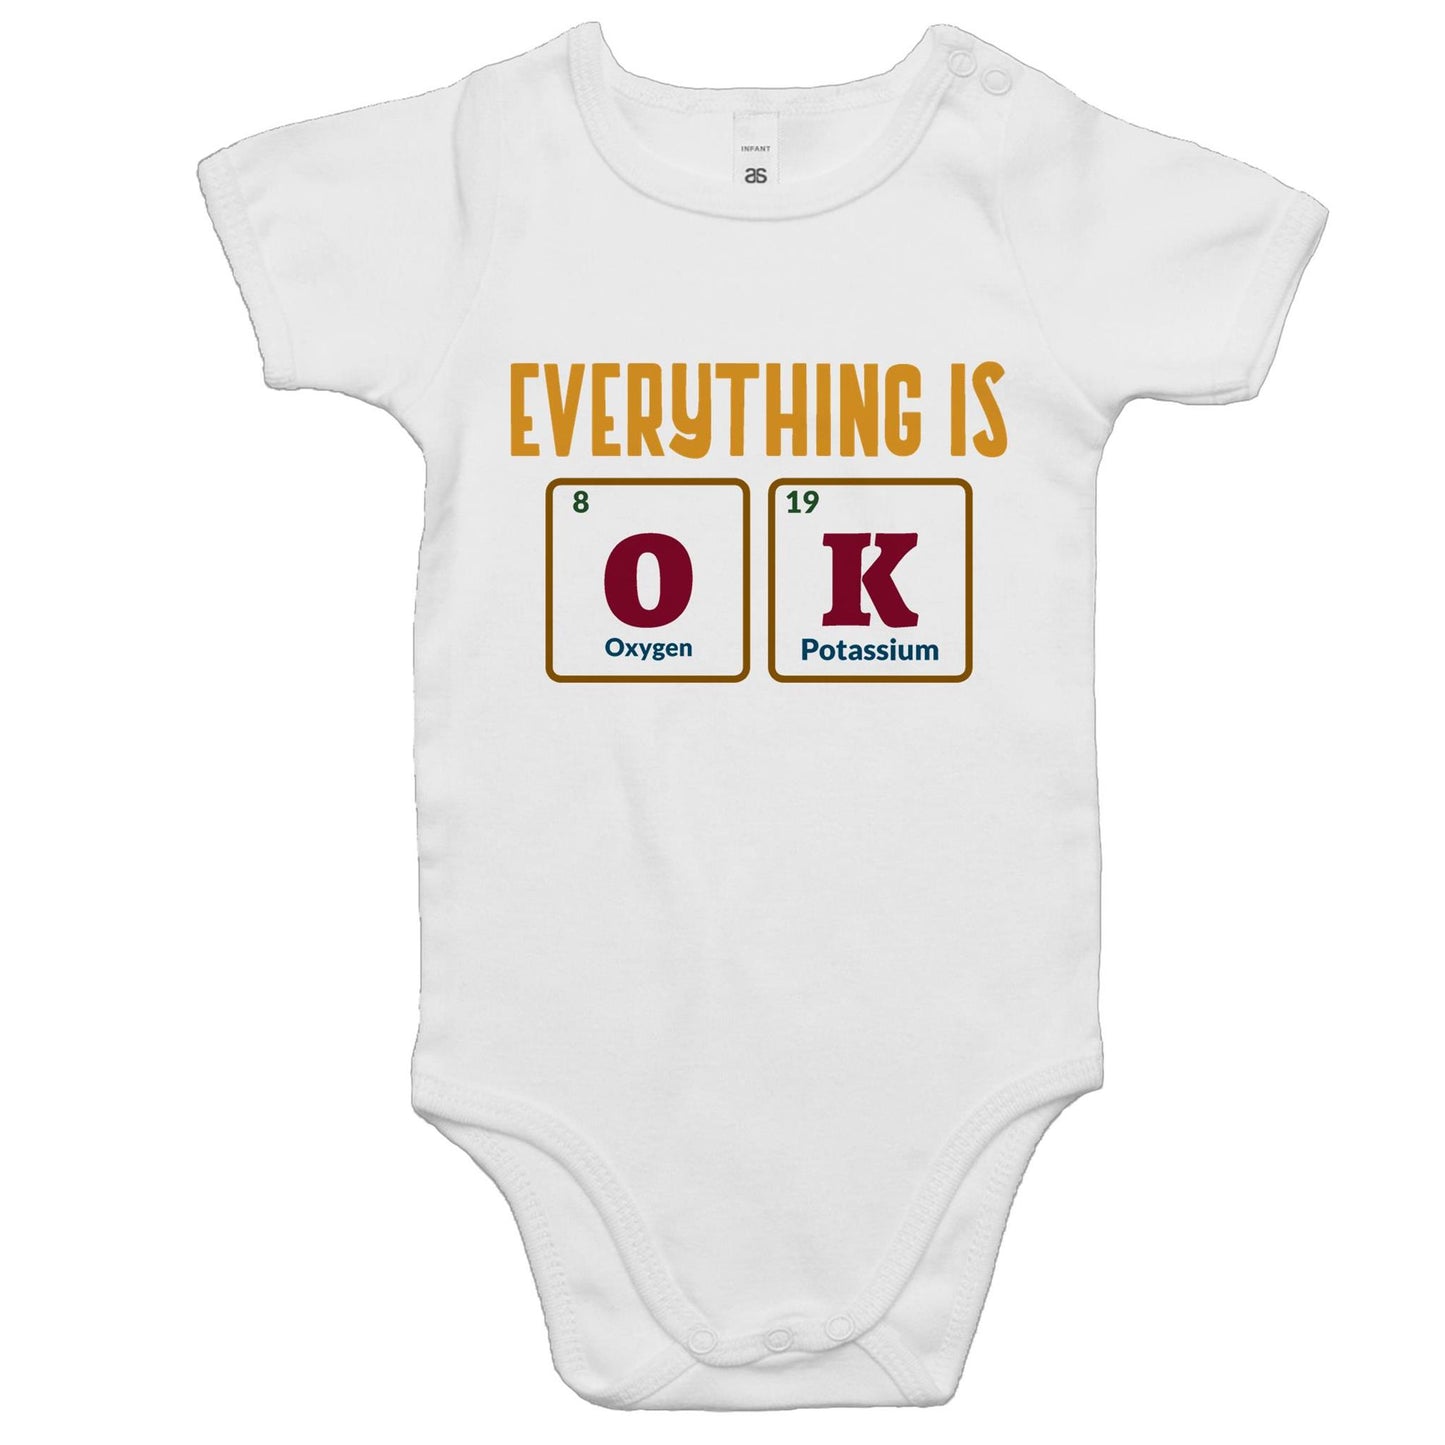 Everything Is OK, Periodic Table Of Elements - Baby Bodysuit White Baby Bodysuit Science